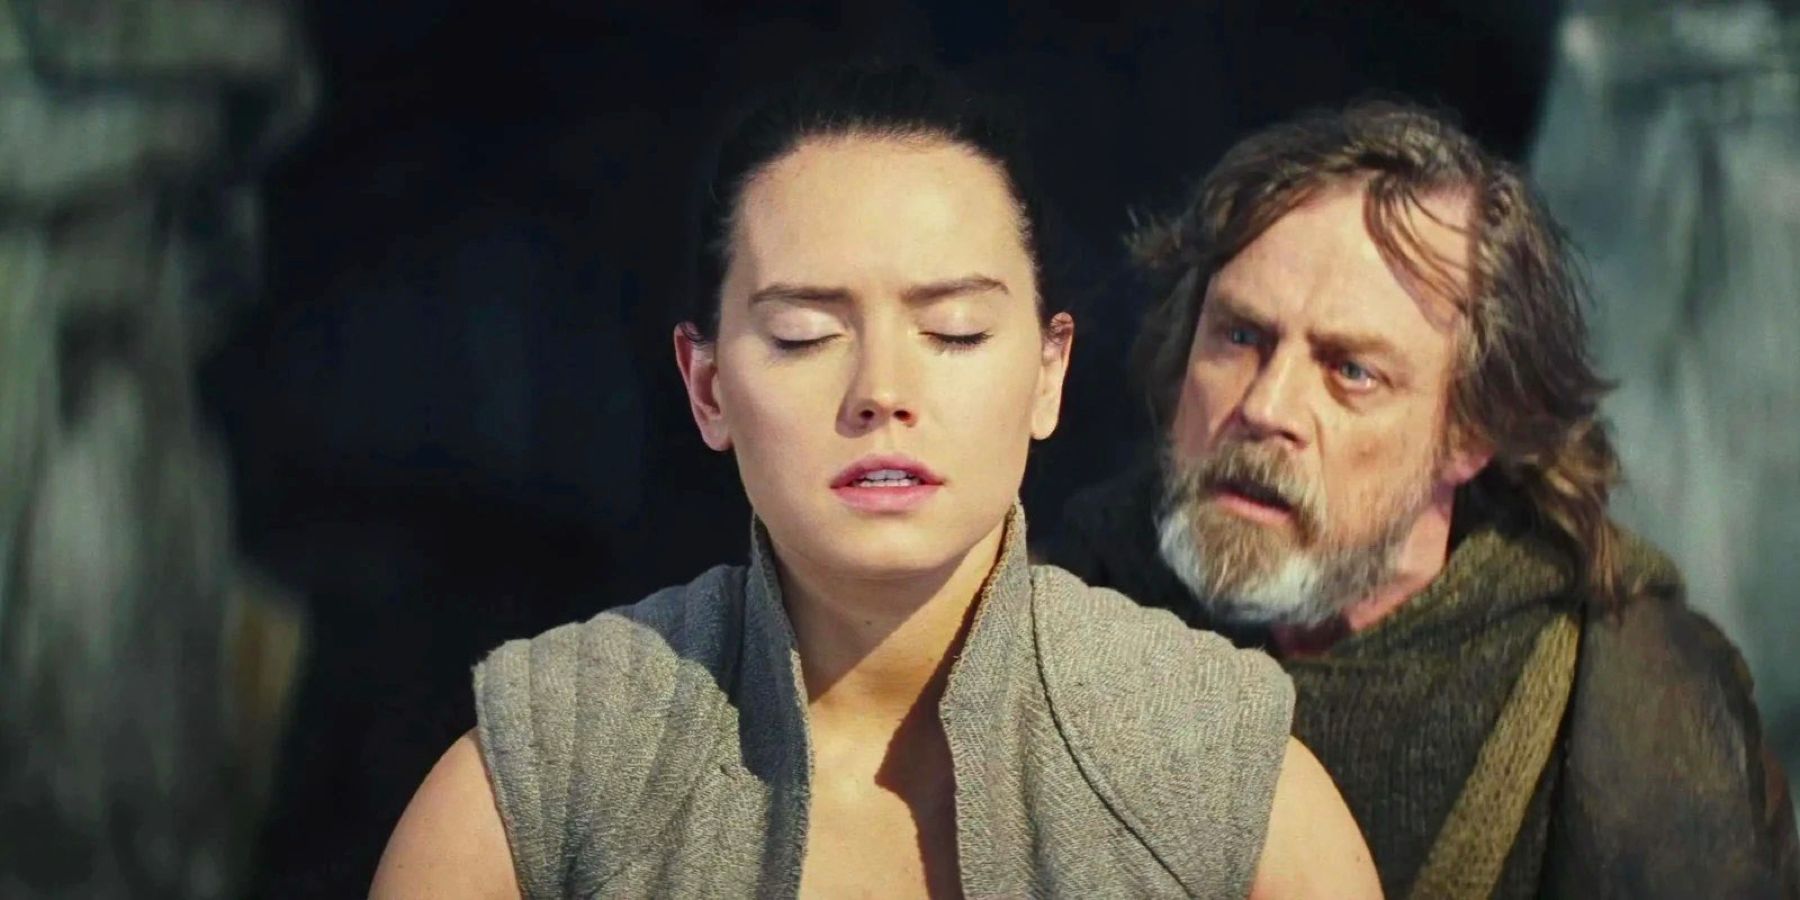 Luke Skywalker teaches Rey how to commune with the Force in Star Wars: Episode VIII - The Last Jedi.